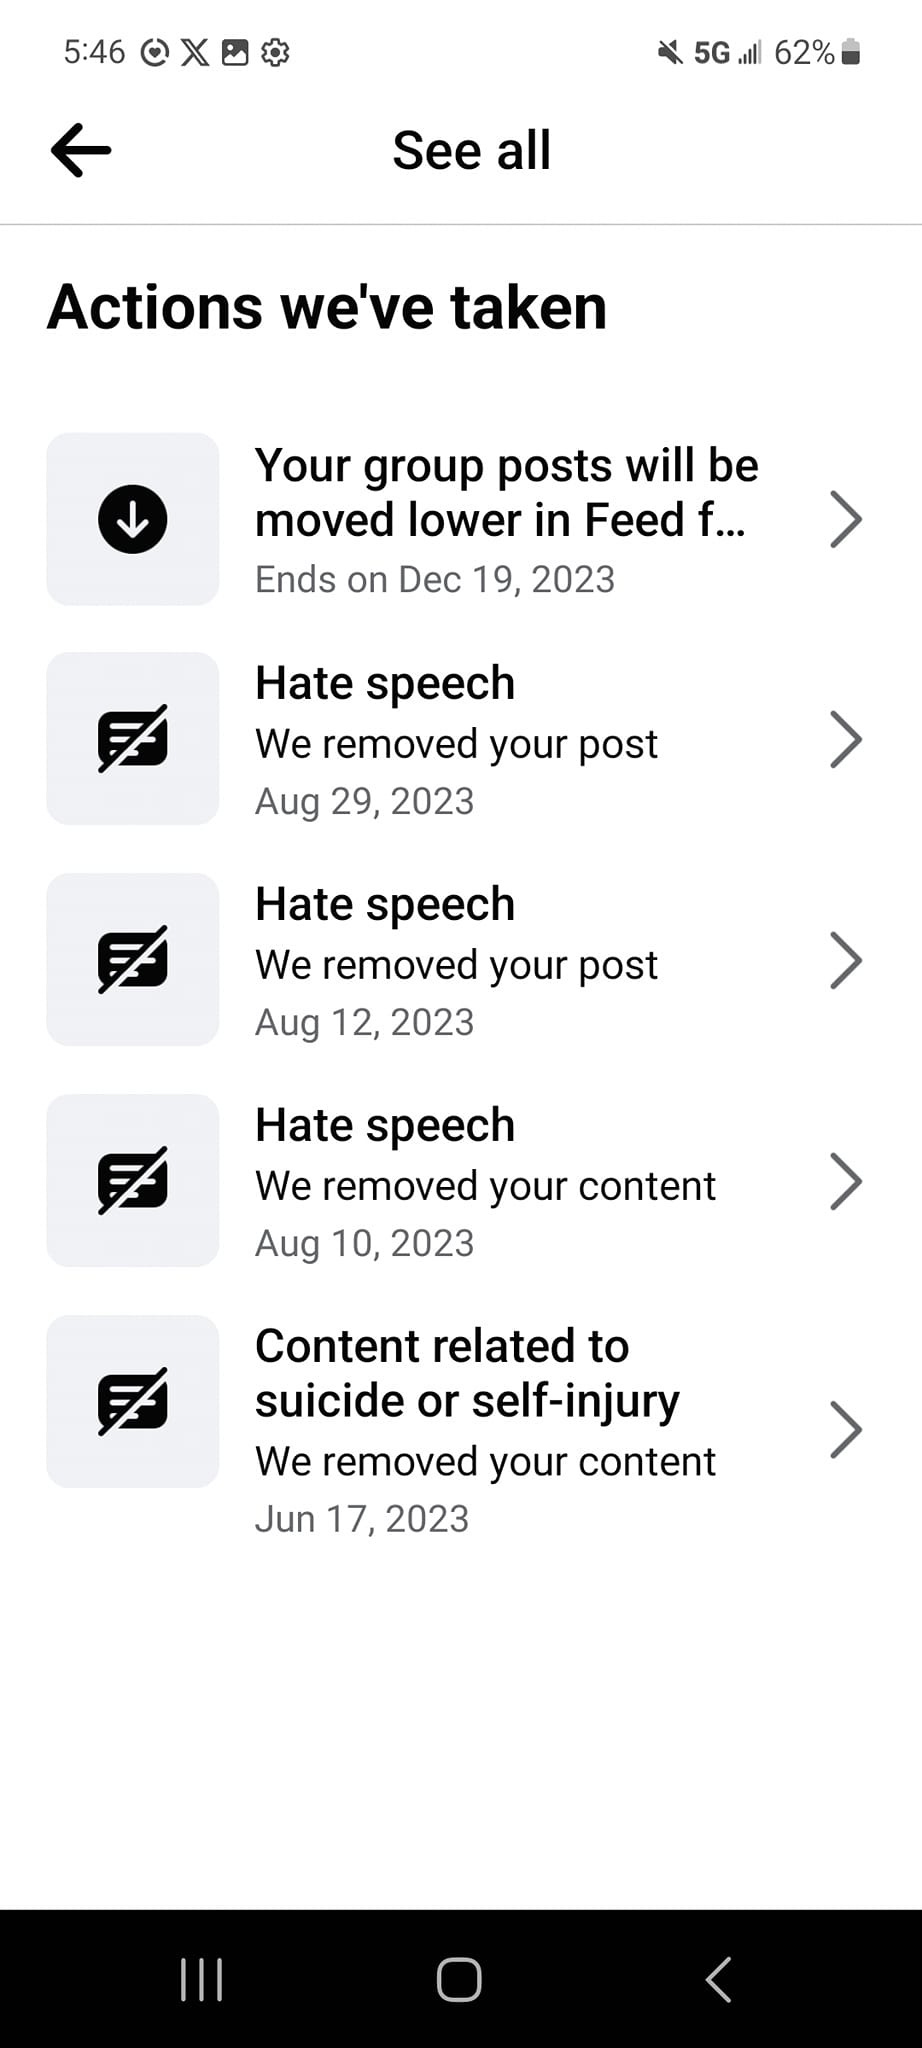 May be an image of text that says '5:46 山 2% See all Actions we've taken Your group posts will be moved lower in Feed f... Ends on Dec 19, 2023 Hate speech We removed your post Aug 29, 2023 Hate speech We removed your post Aug 12, 2023 Hate speech We removed your content Aug 10, 2023 Content related to suicide or self-injury We removed your content Jun 17, 2023'